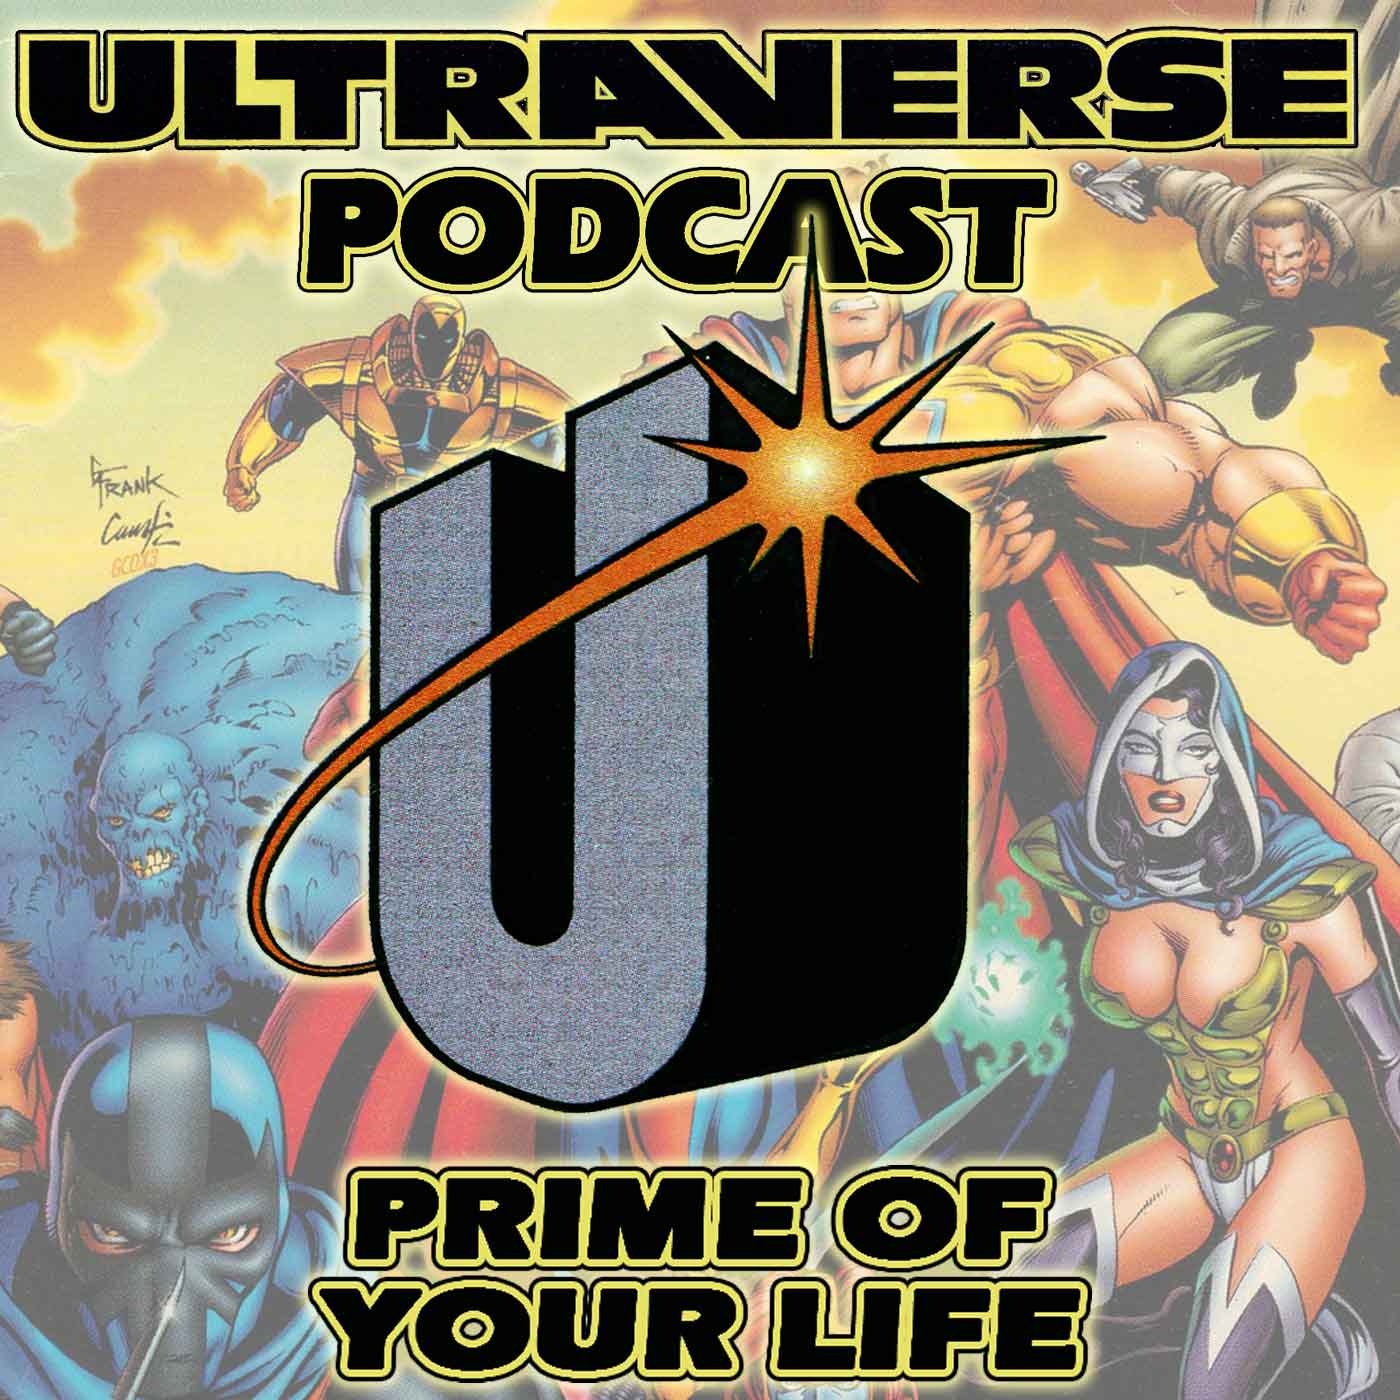 Ultraverse Podcast: Prime of Your Life